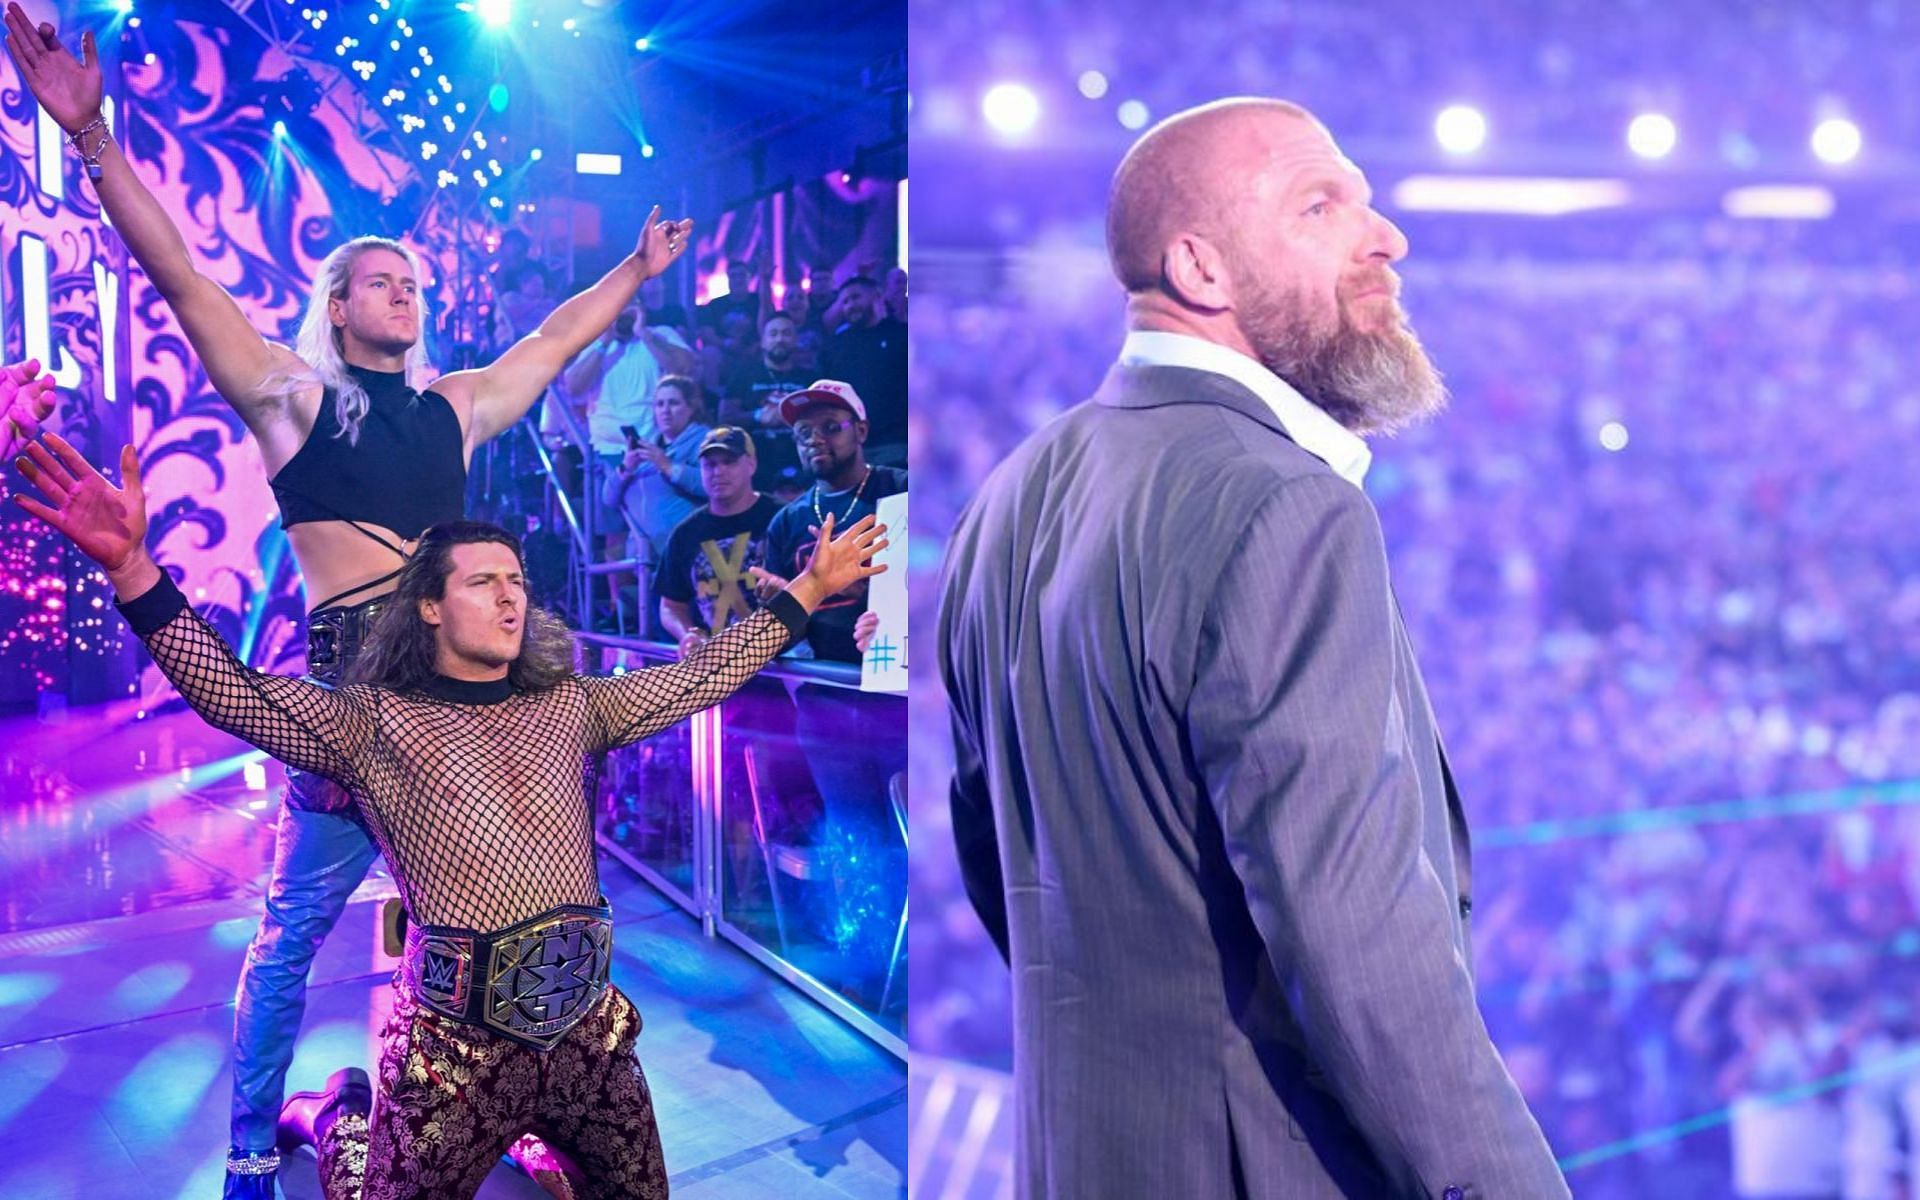 The NXT Tag Team Champions are in awe of Triple H